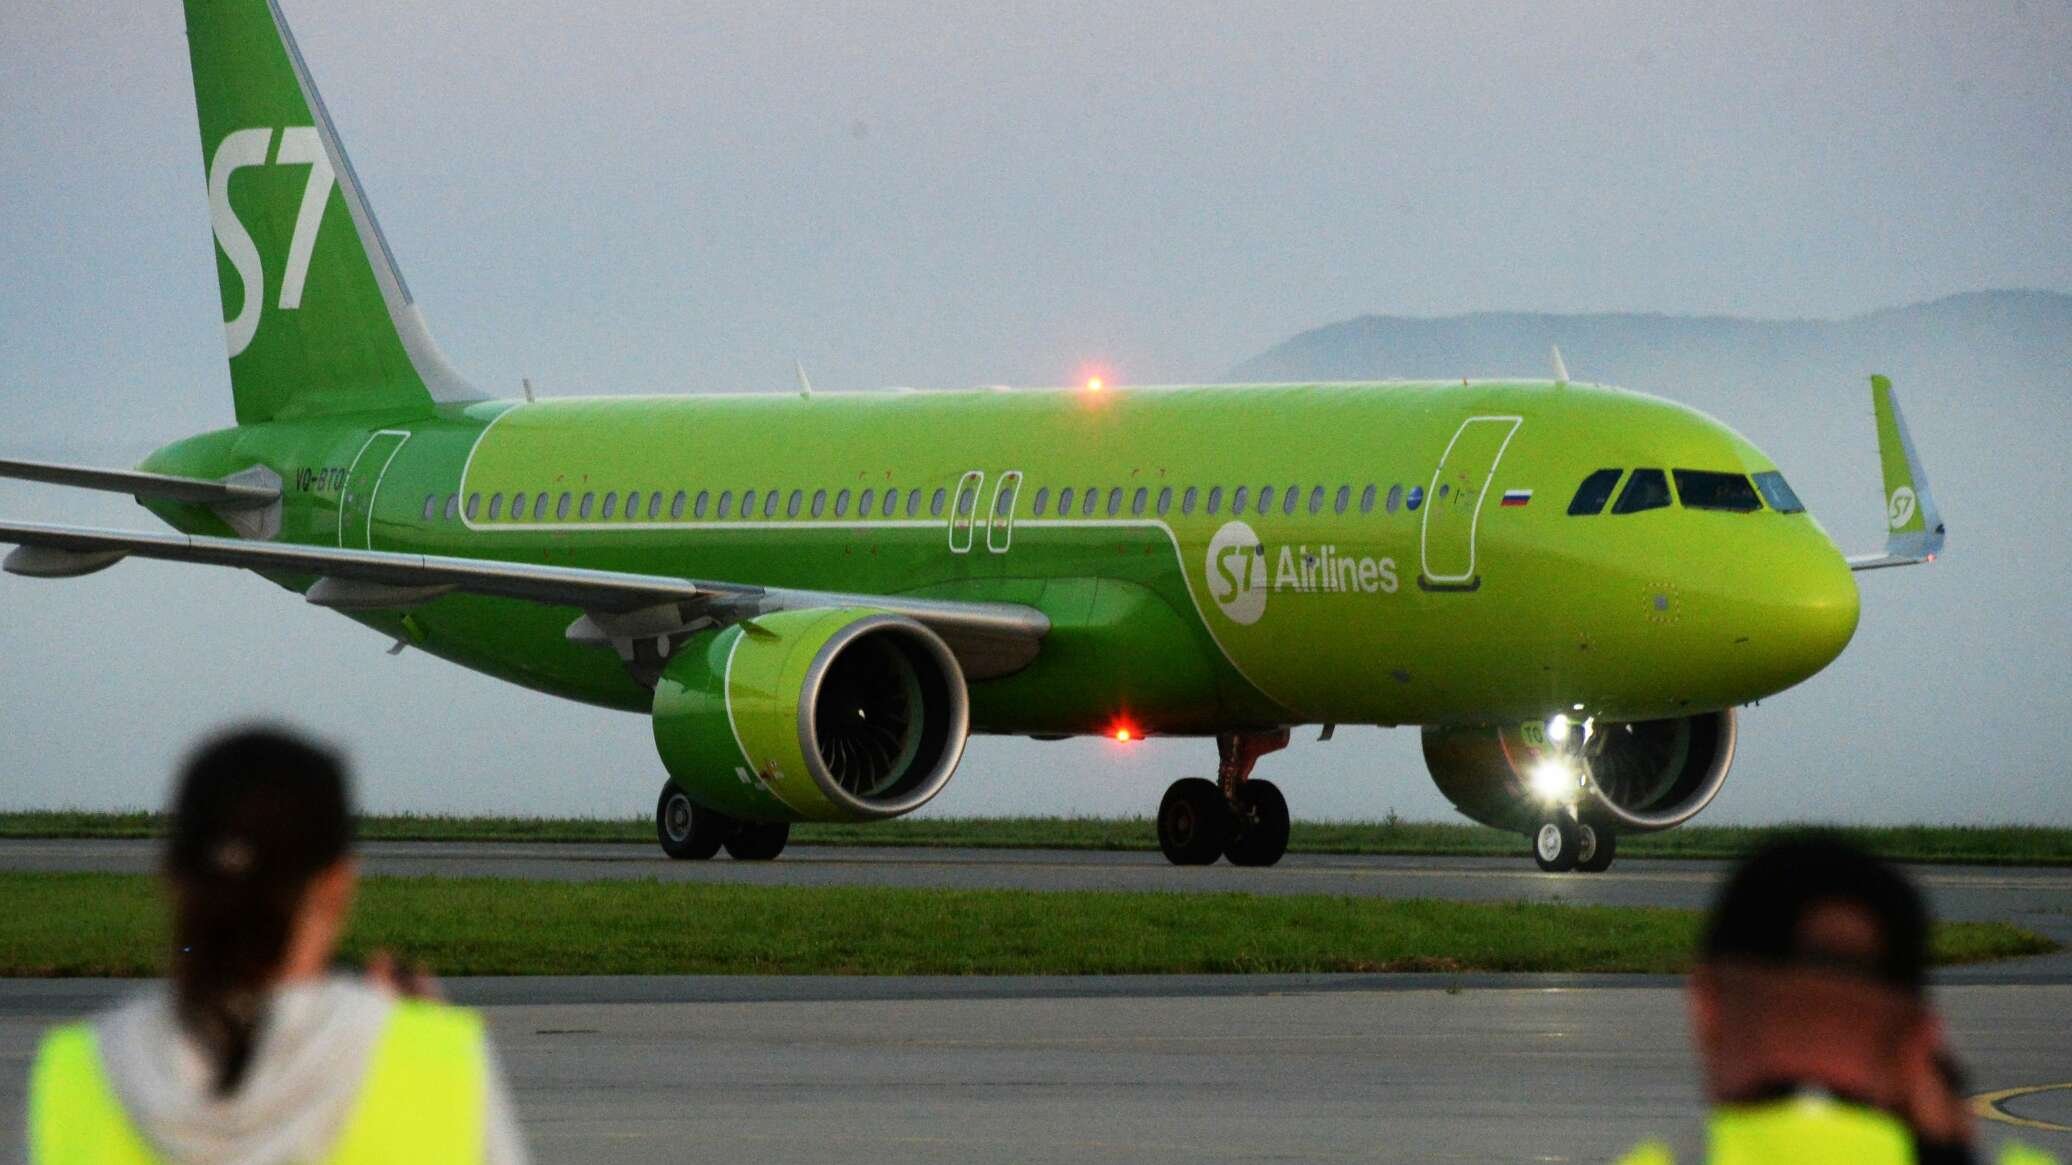 Авиарейс ургенч. A320 s7 Airlines Fenix. Airbus a320 s7. S7 Airlines 3046. Airbus a320 s7 в горах.